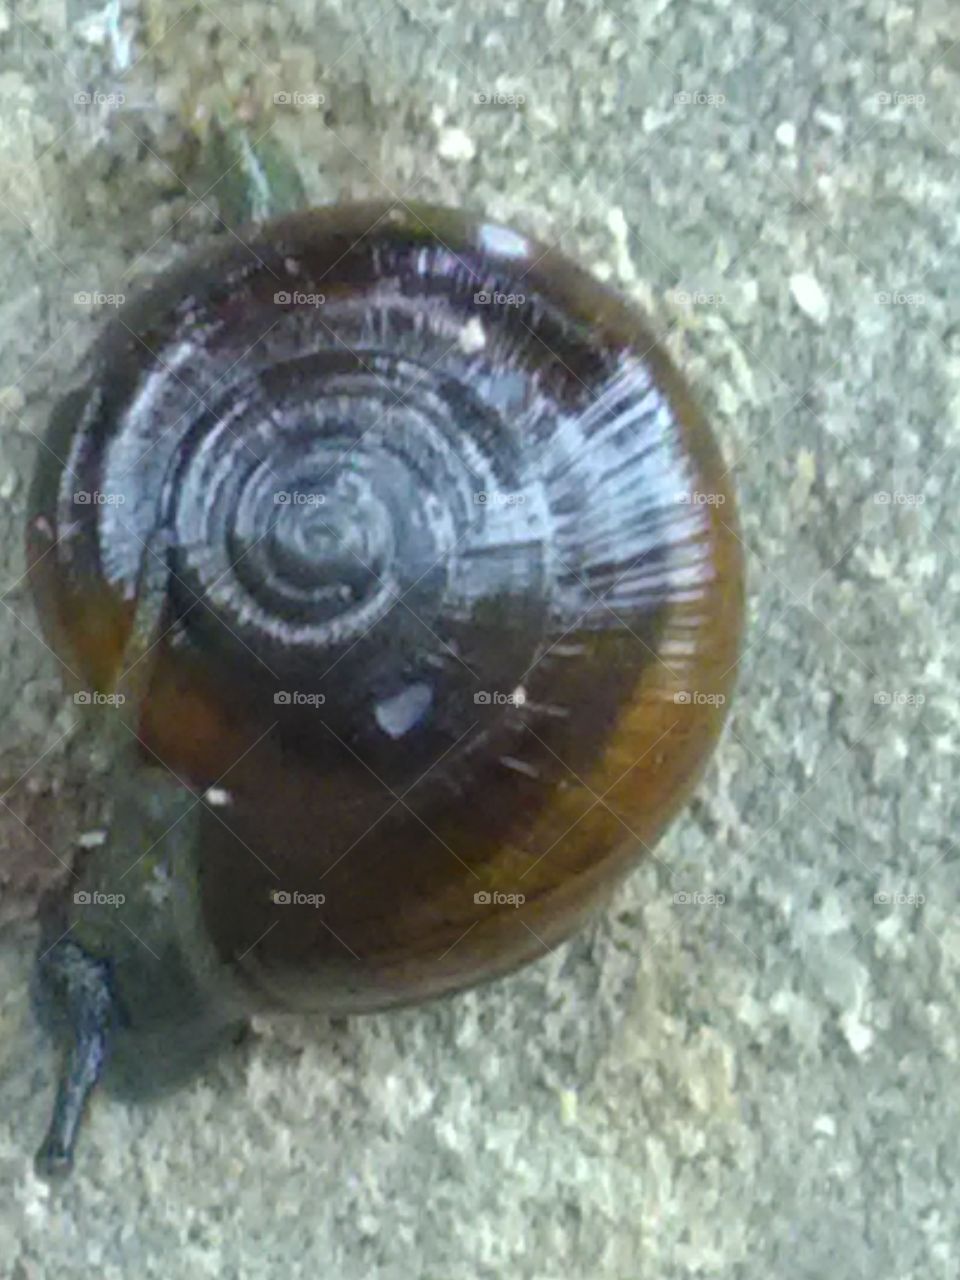 This is snail anywayar present on earth in rainy season.